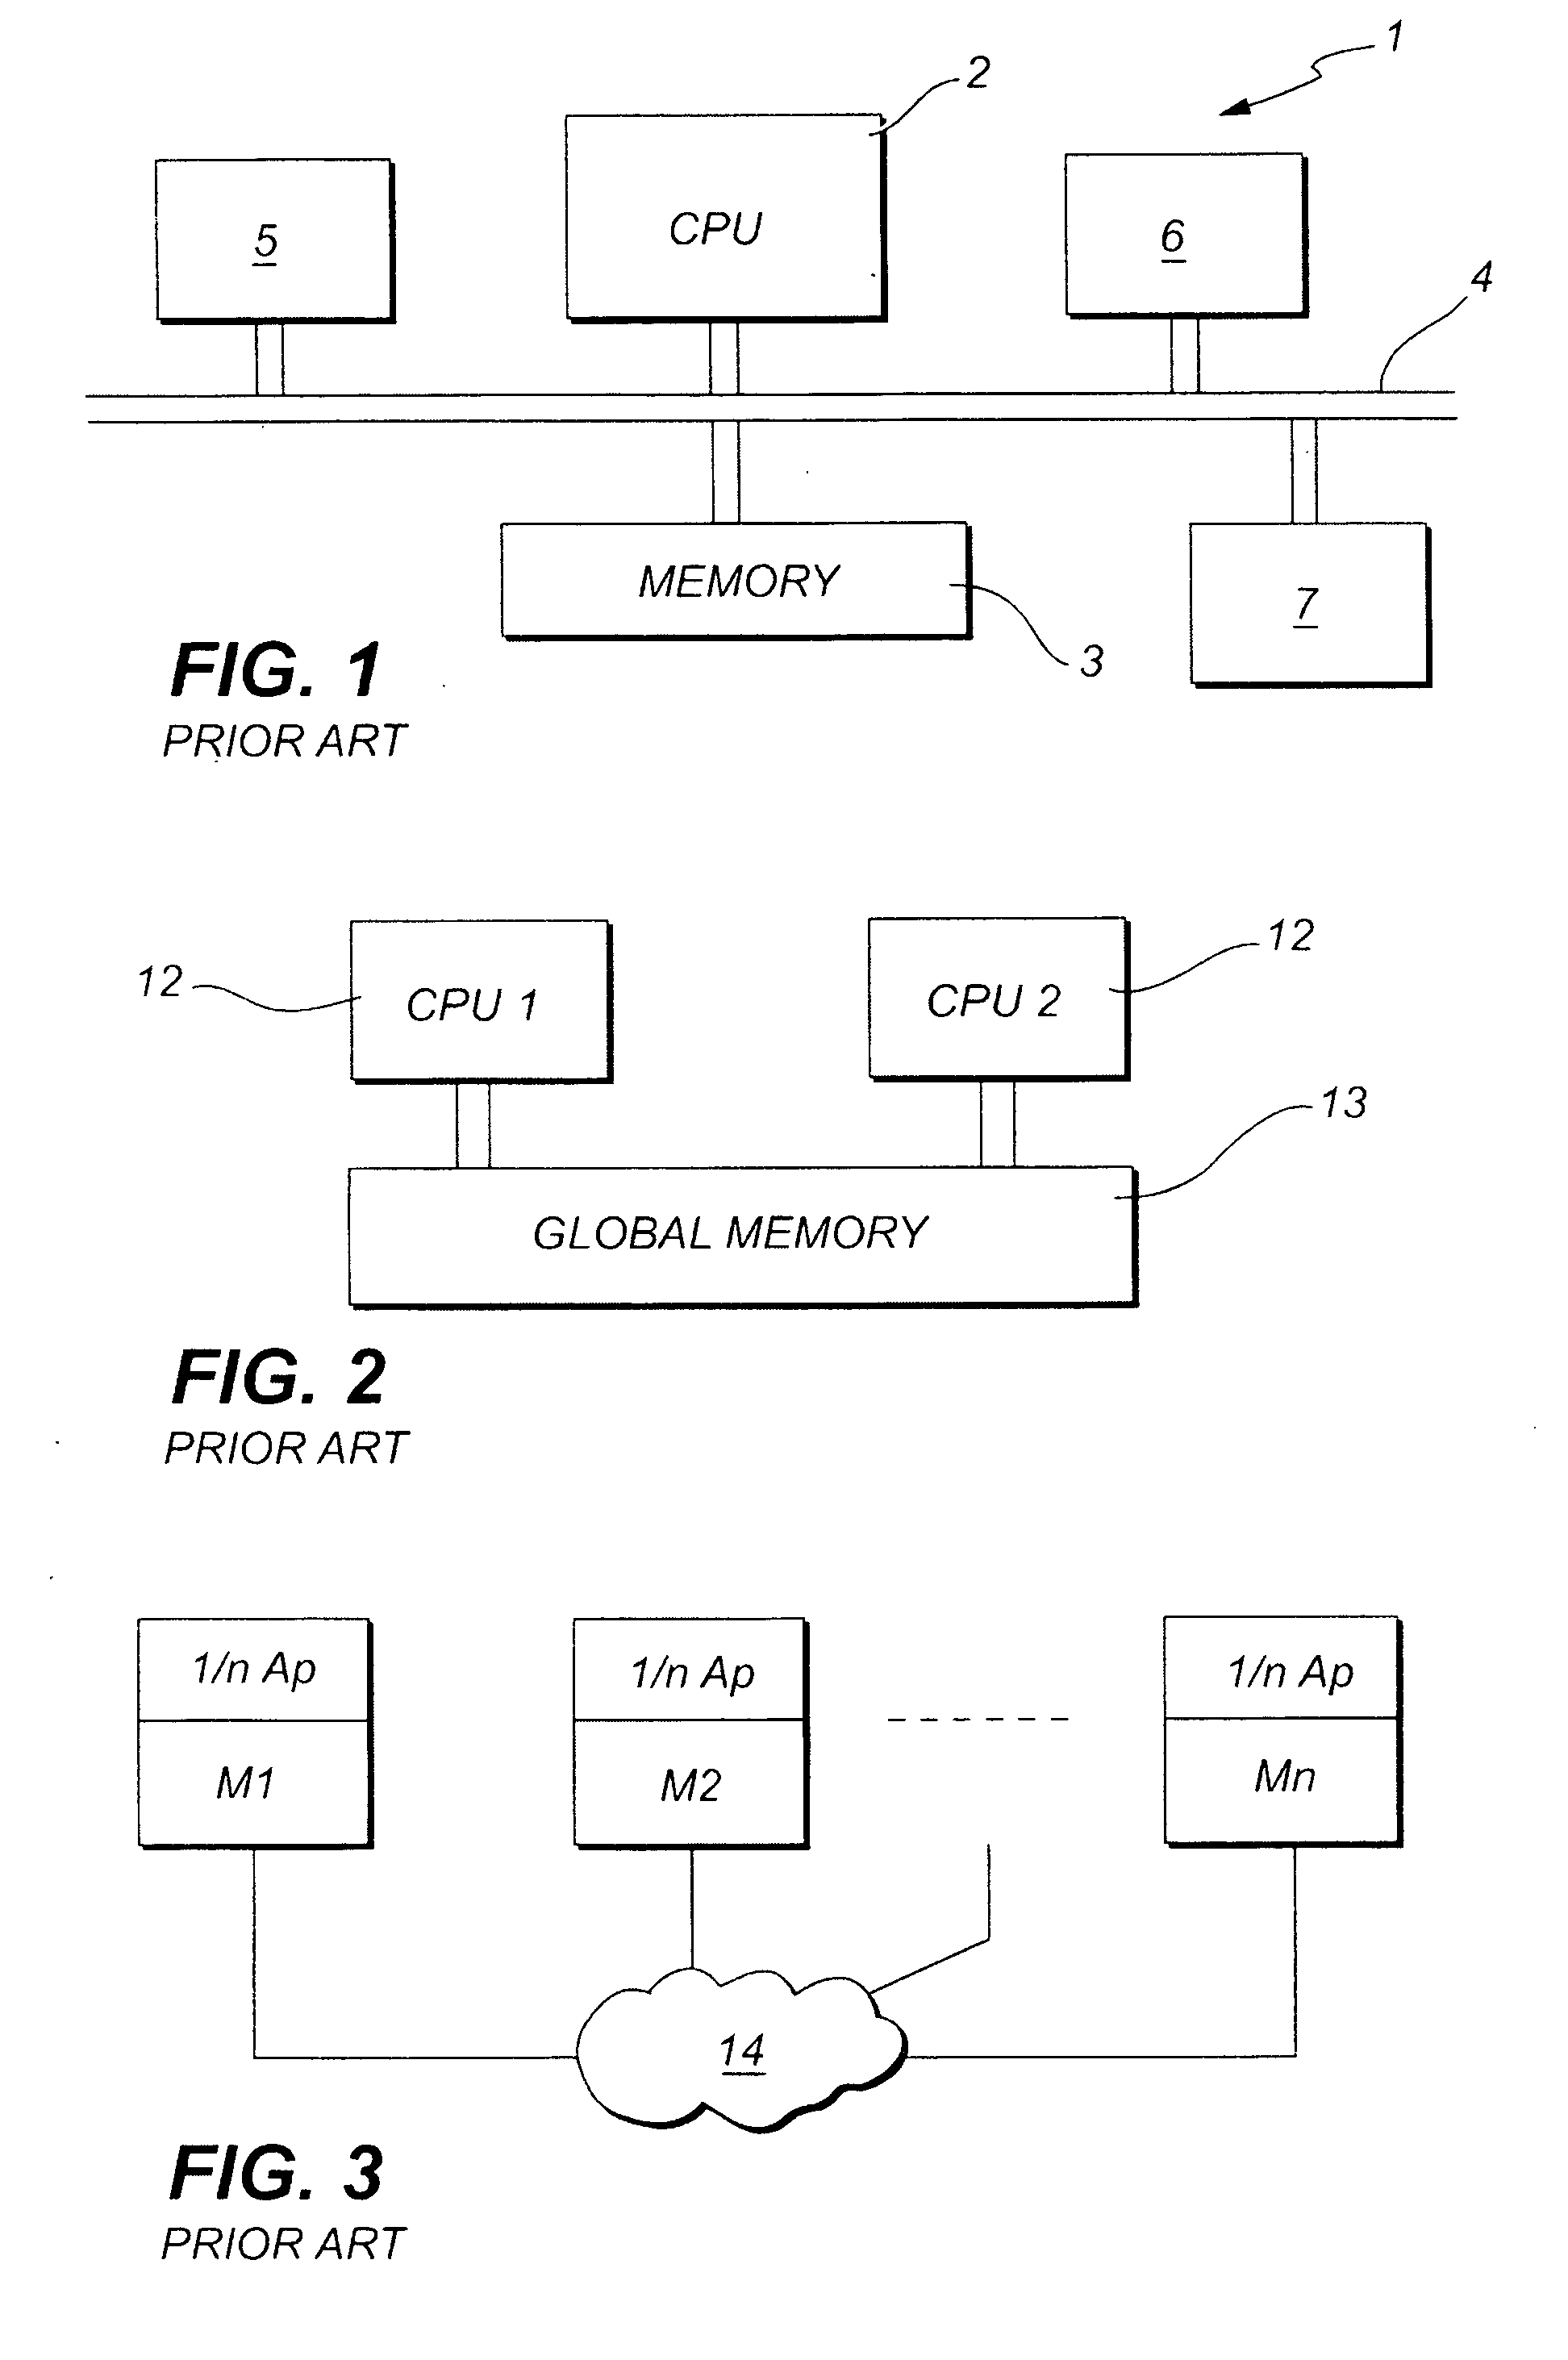 Computer architecture and method of operation for multi-computer distributed processing and coordinated memory and asset handling